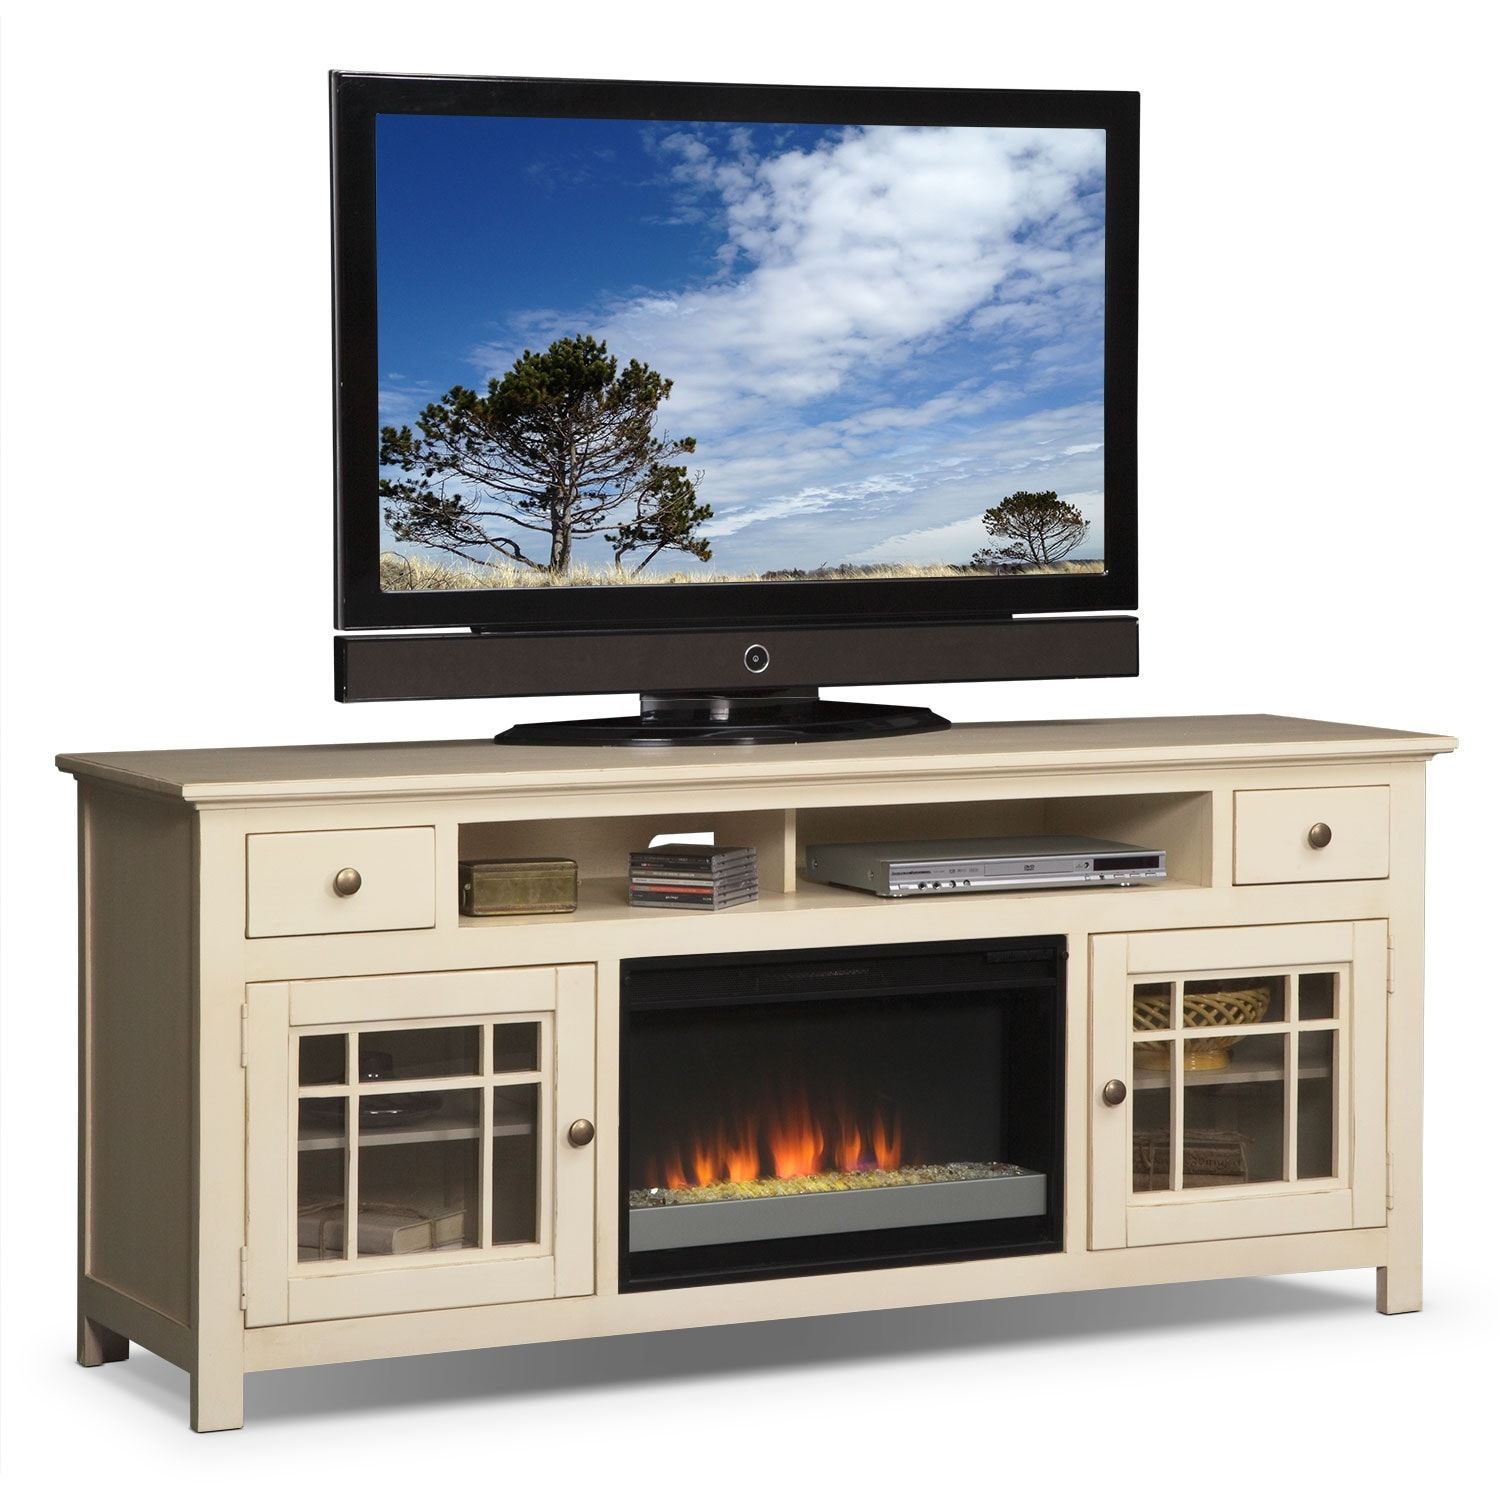 Merrick 74" Fireplace Tv Stand With Contemporary Insert – White Throughout Modern Fireplace Tv Stands (View 17 of 20)